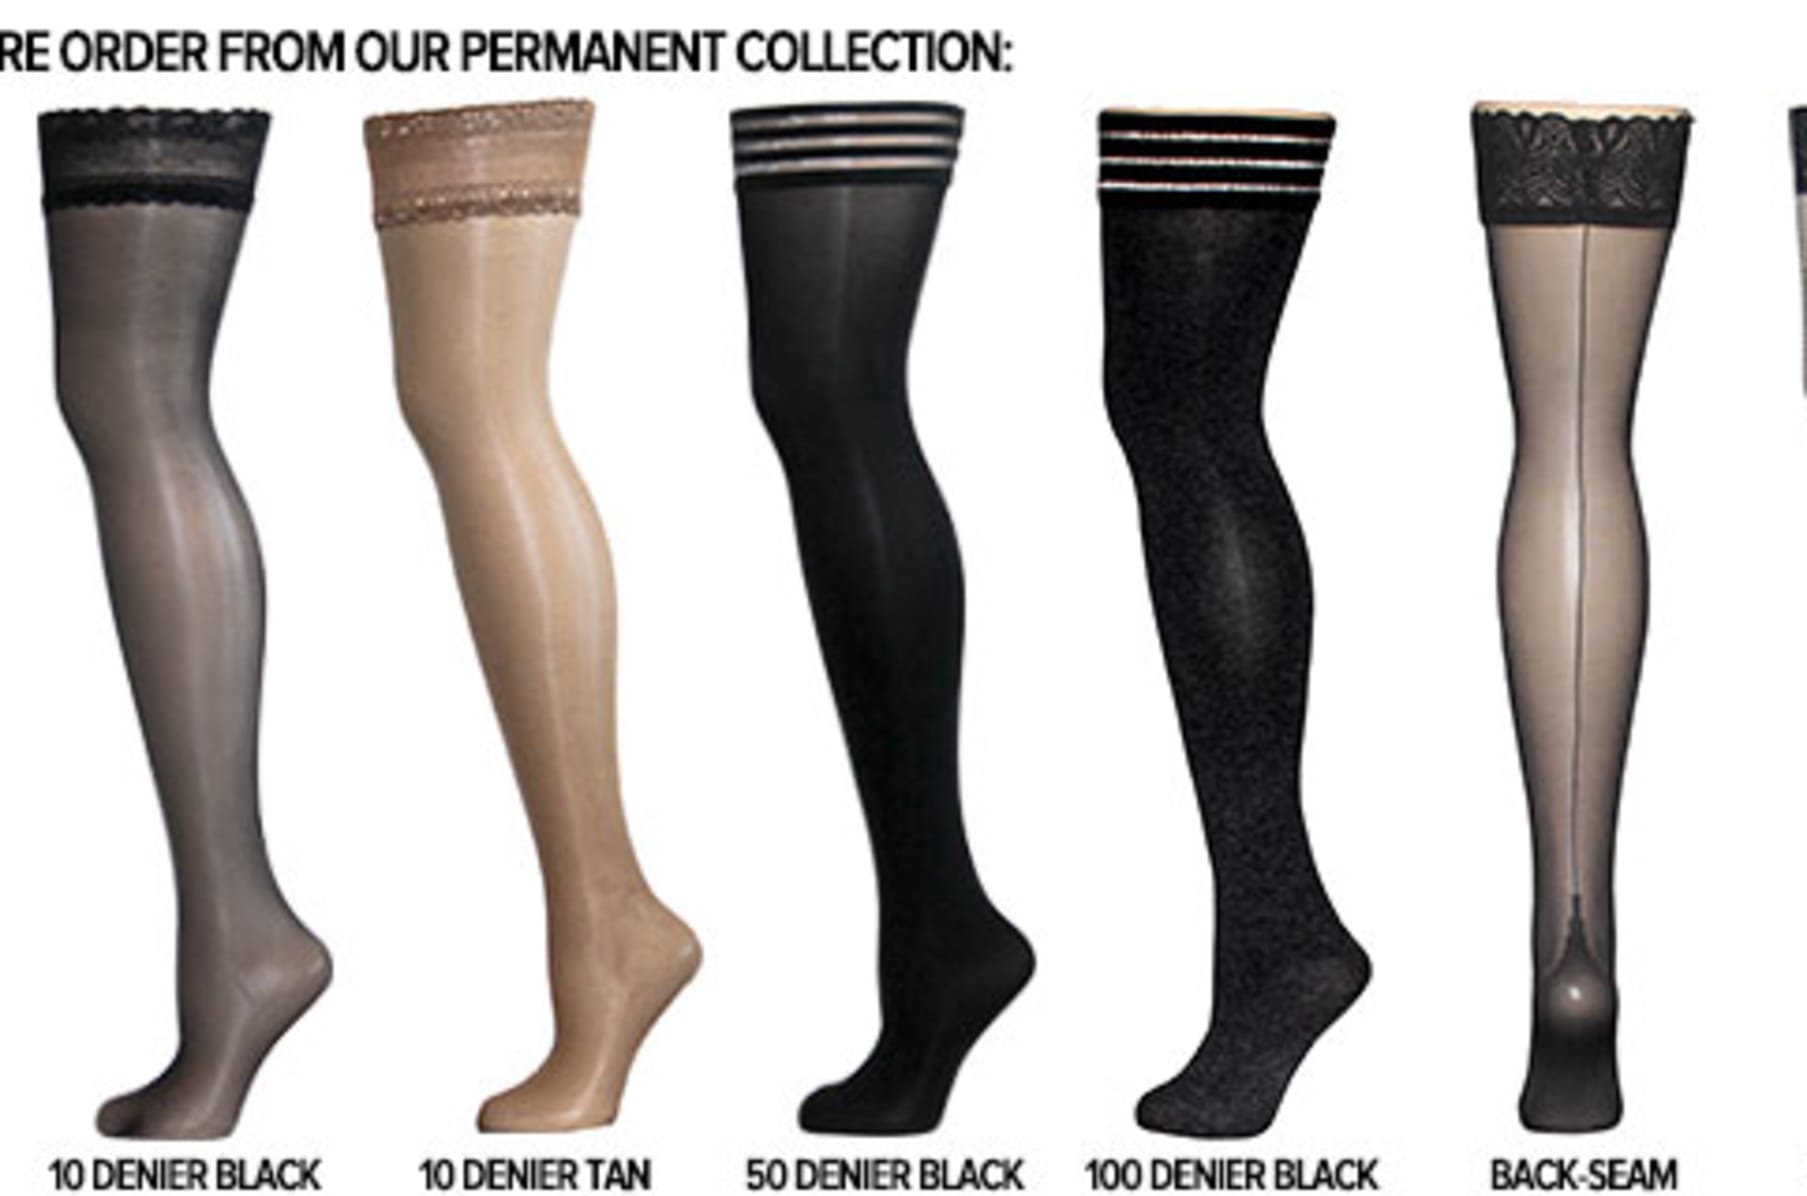 How to stay fashionable with warm stockings – VienneMilano